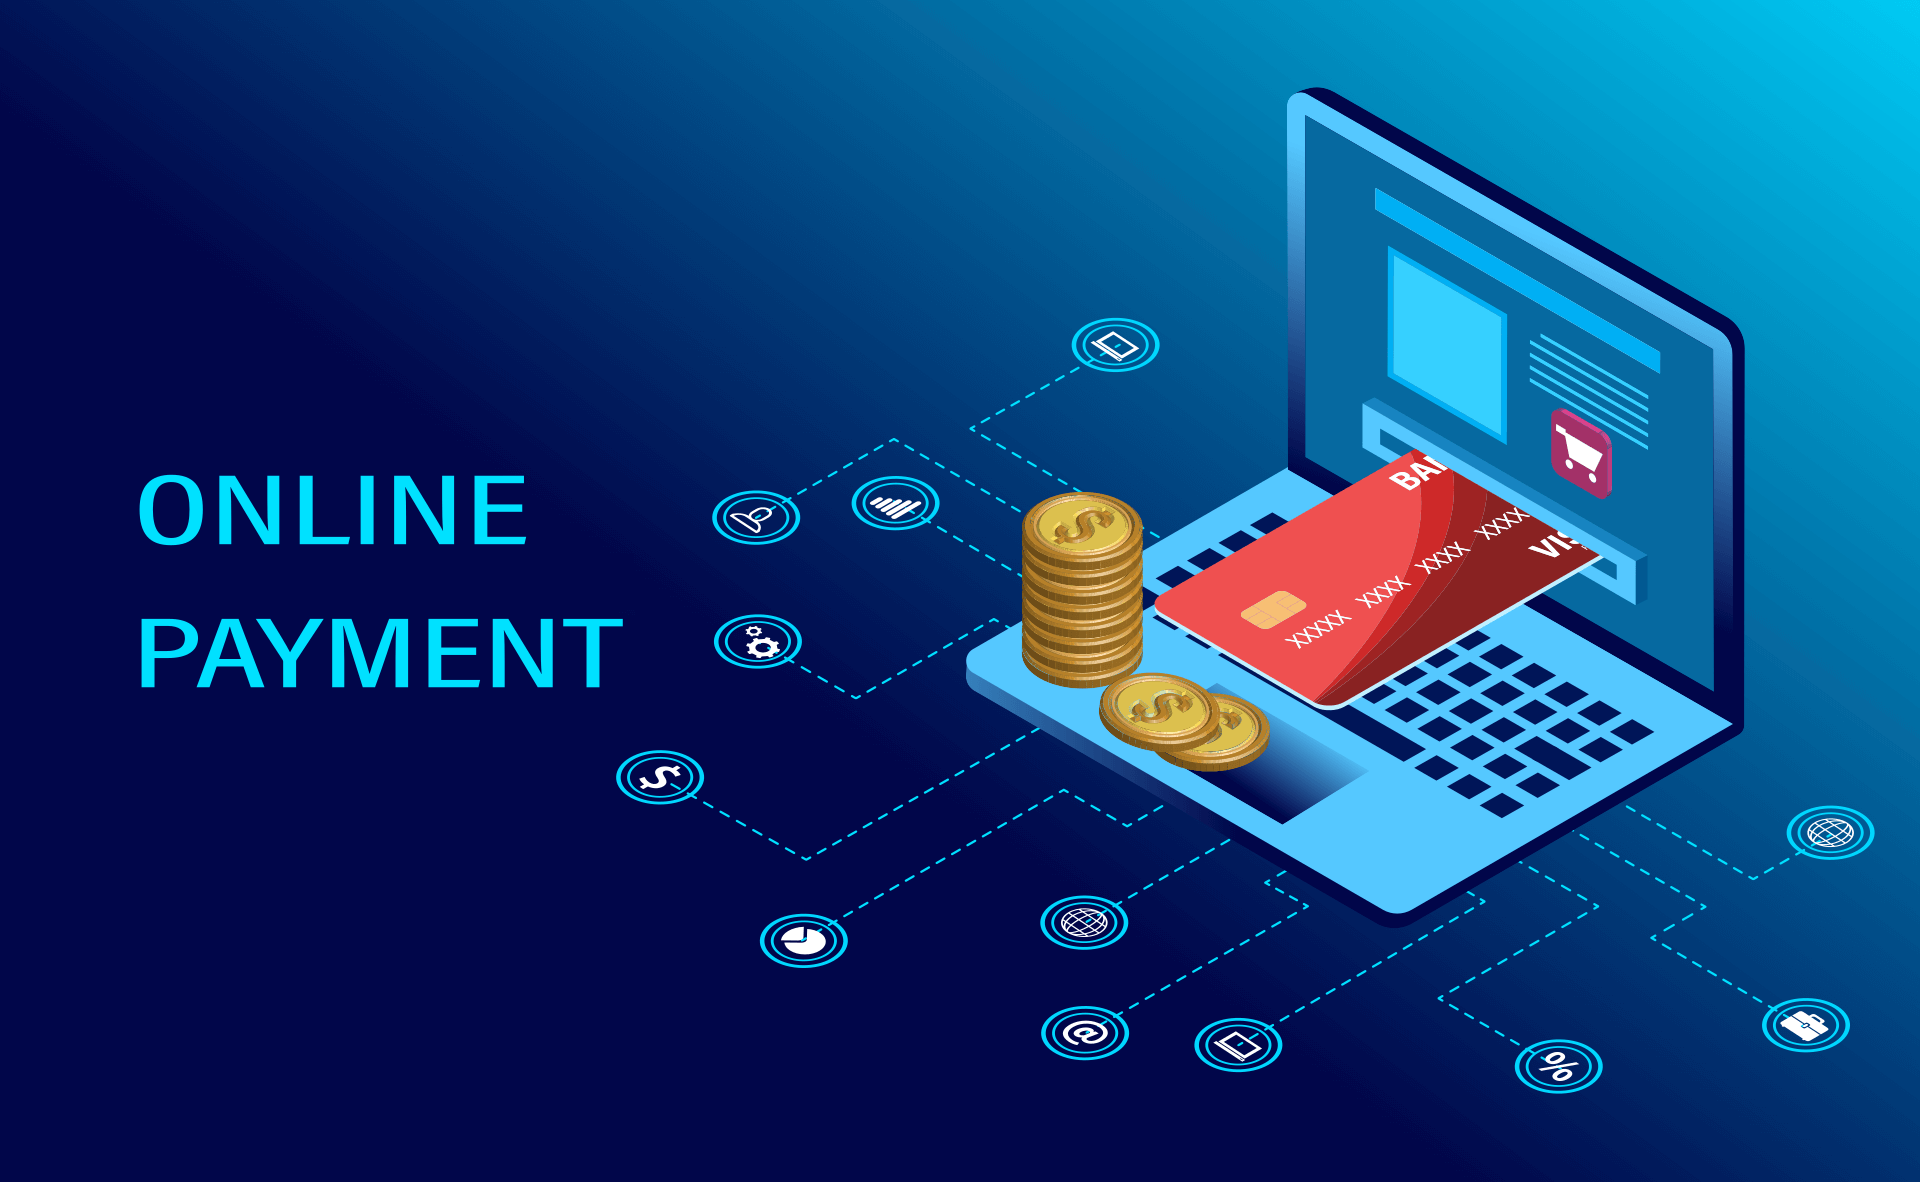 Best Practices for Secure Online Payment